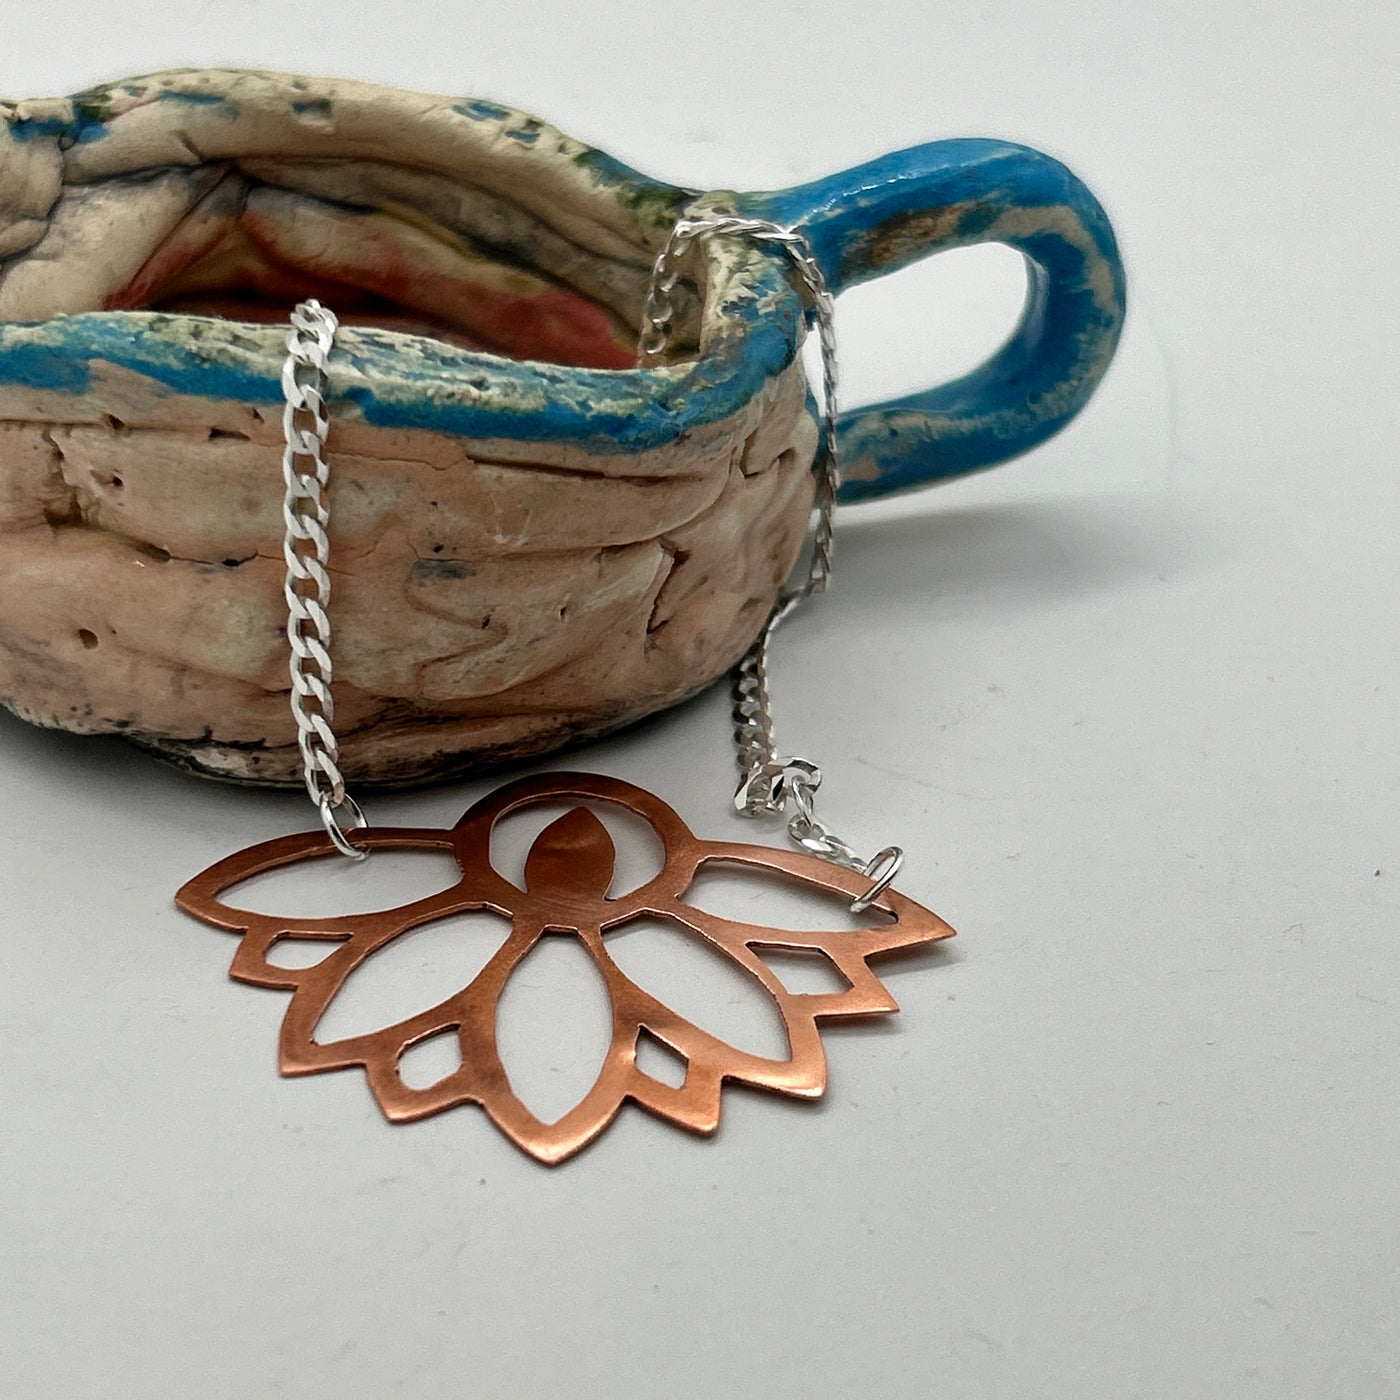 Copper perforated abstract design on silver chain